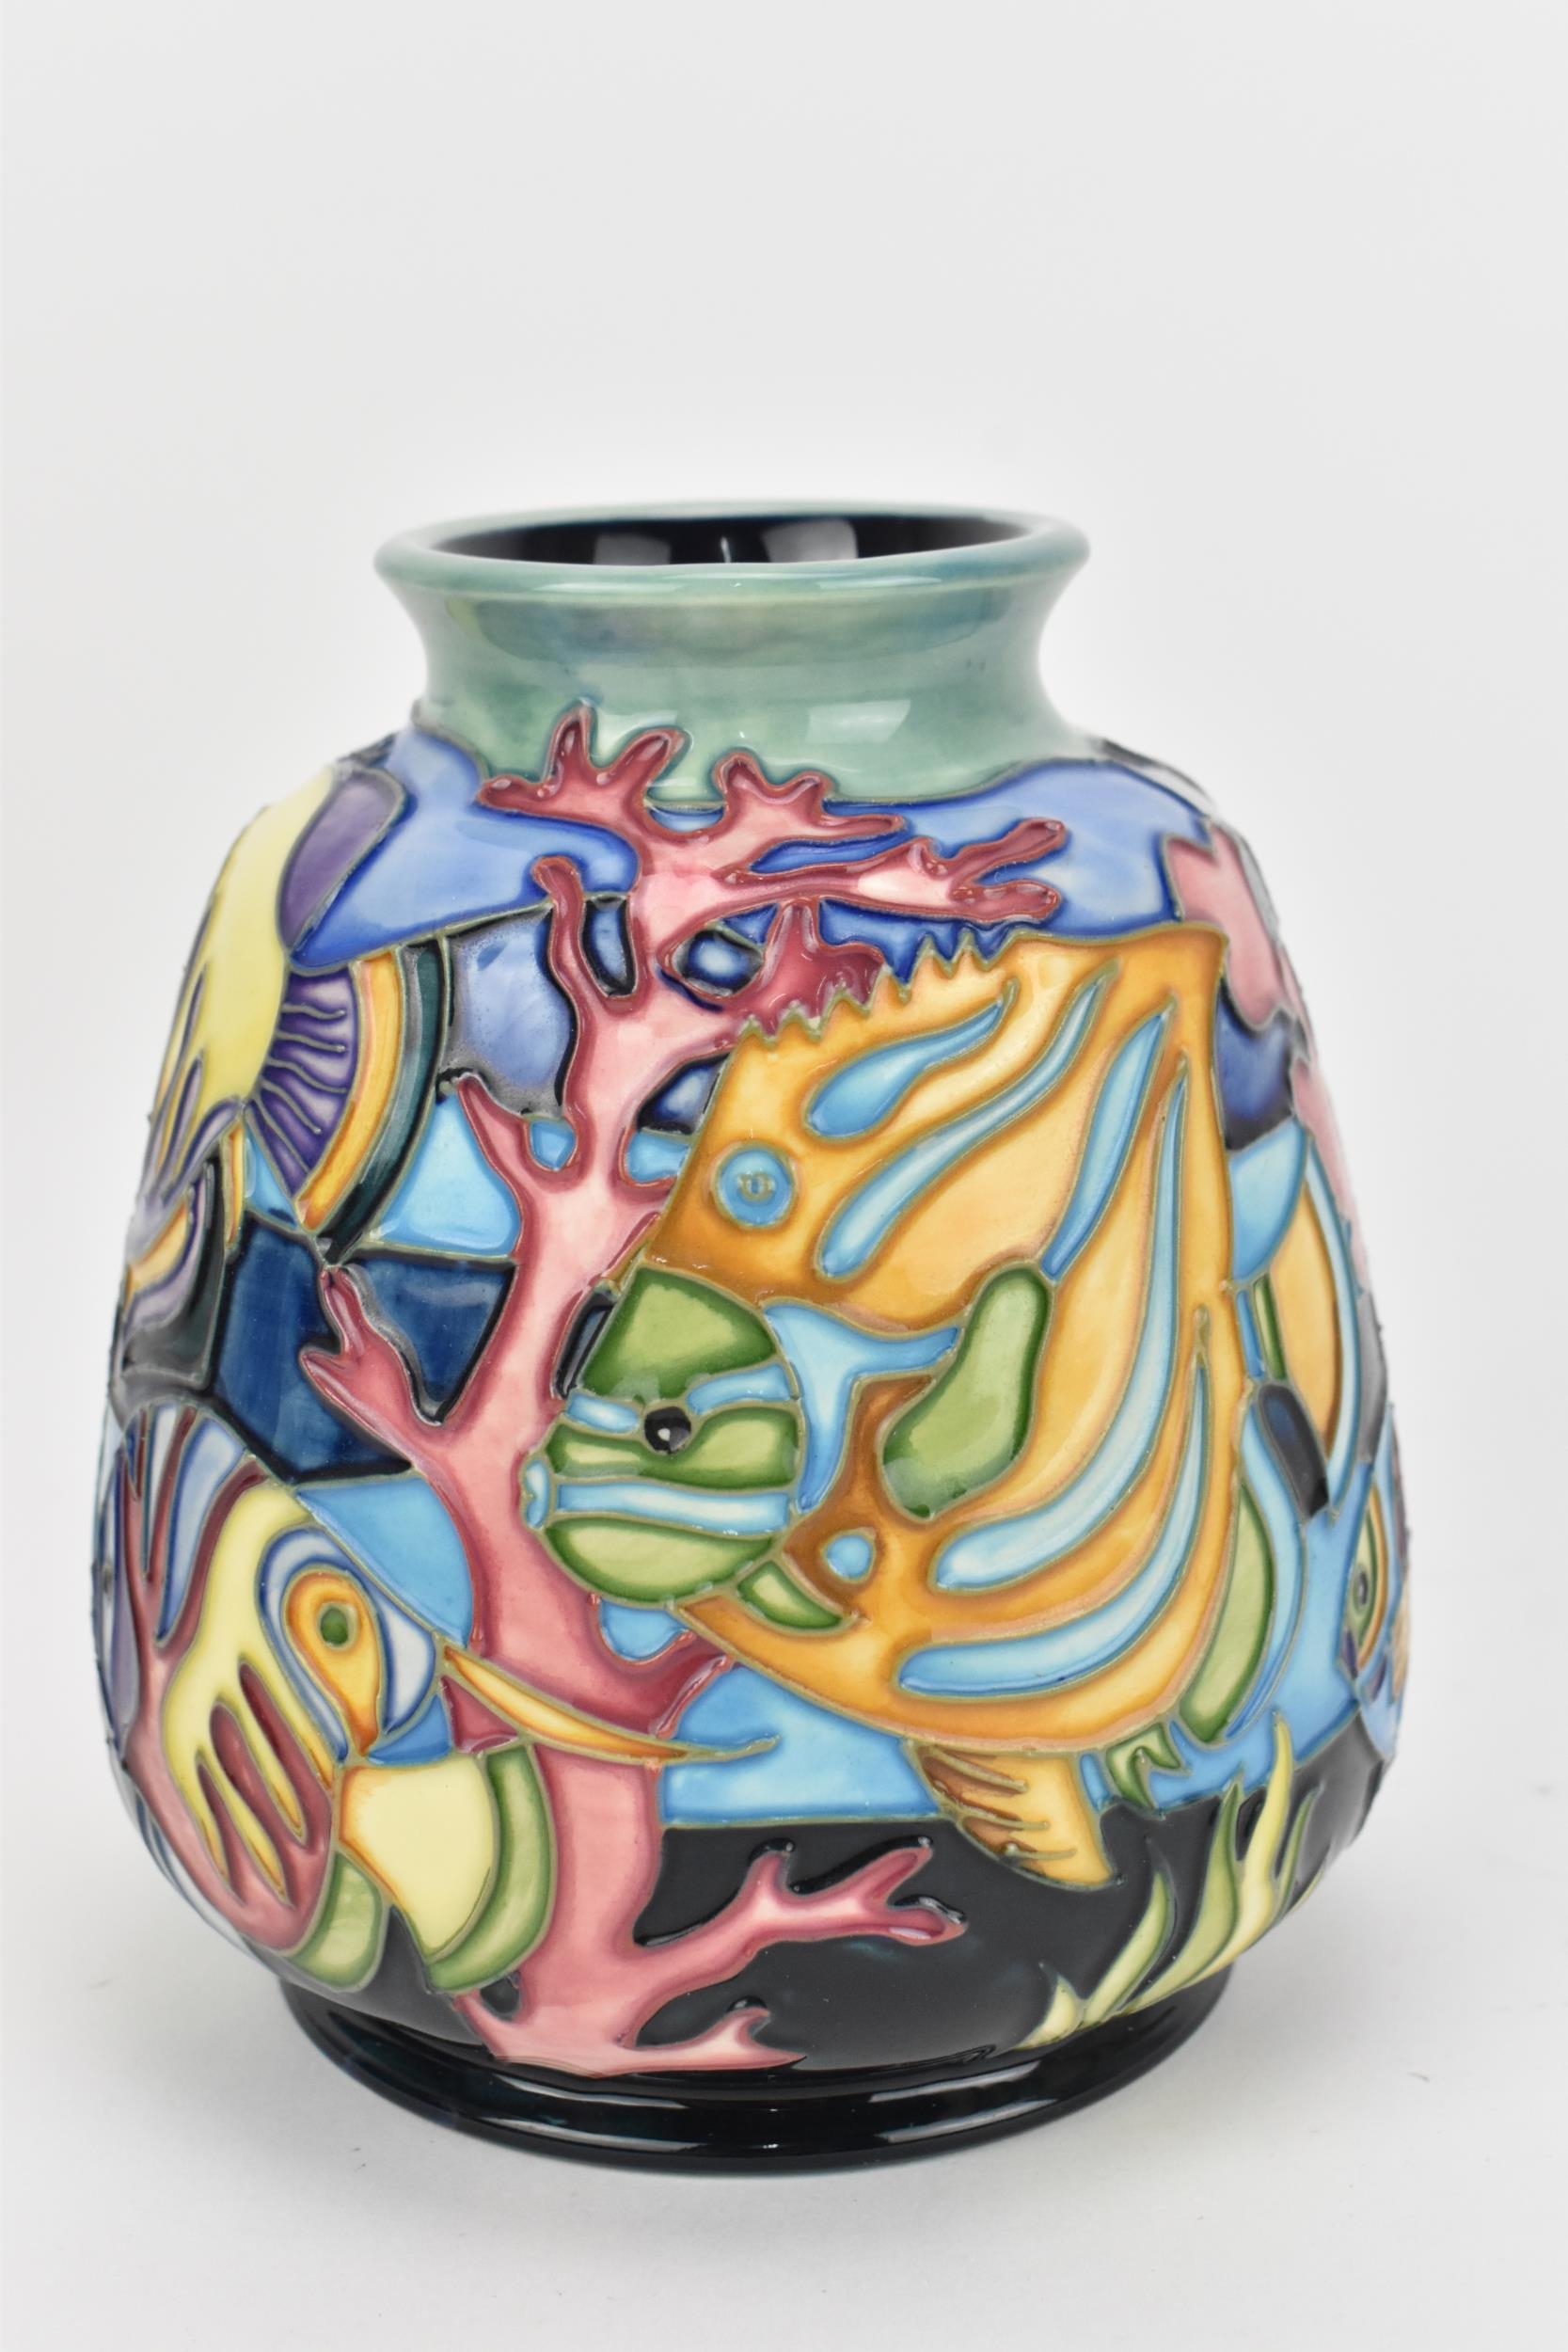 A Moorcroft Pottery vase in the 'Martinique' design by Jeanne McDougall, depicting coral reef - Image 3 of 5